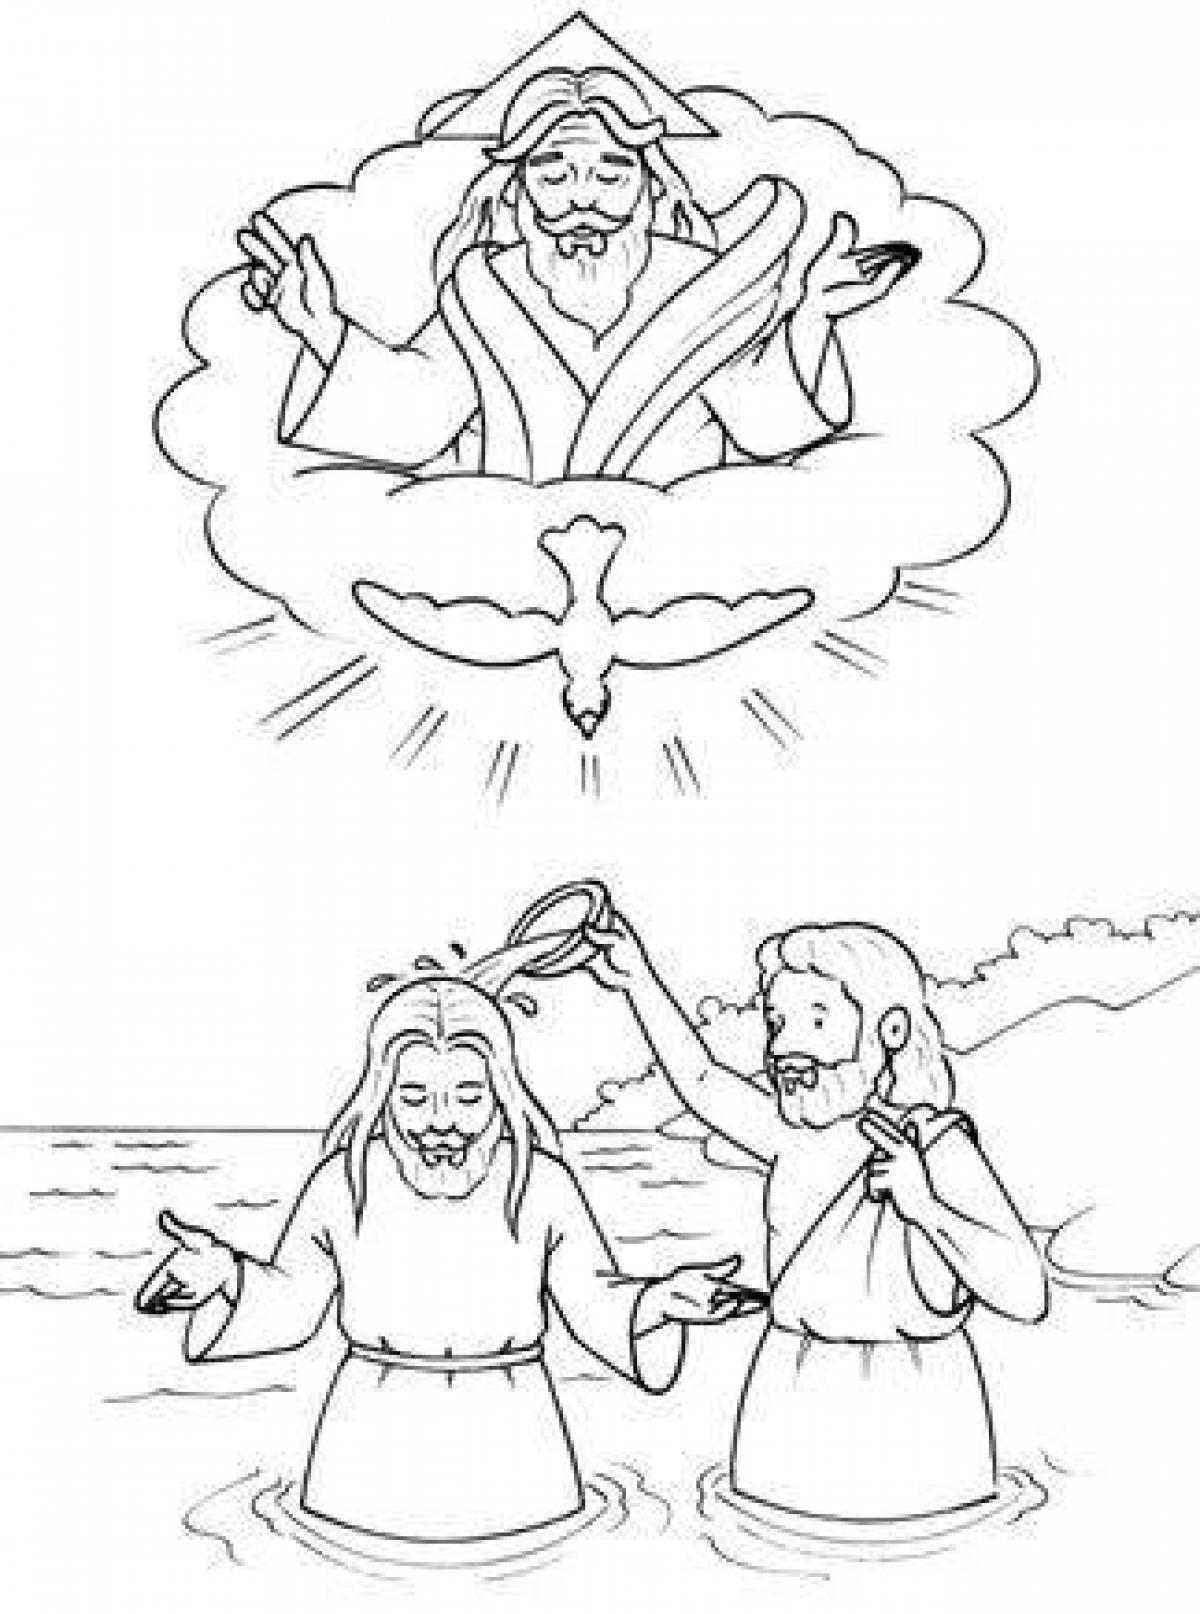 Children's baptism glowing coloring book